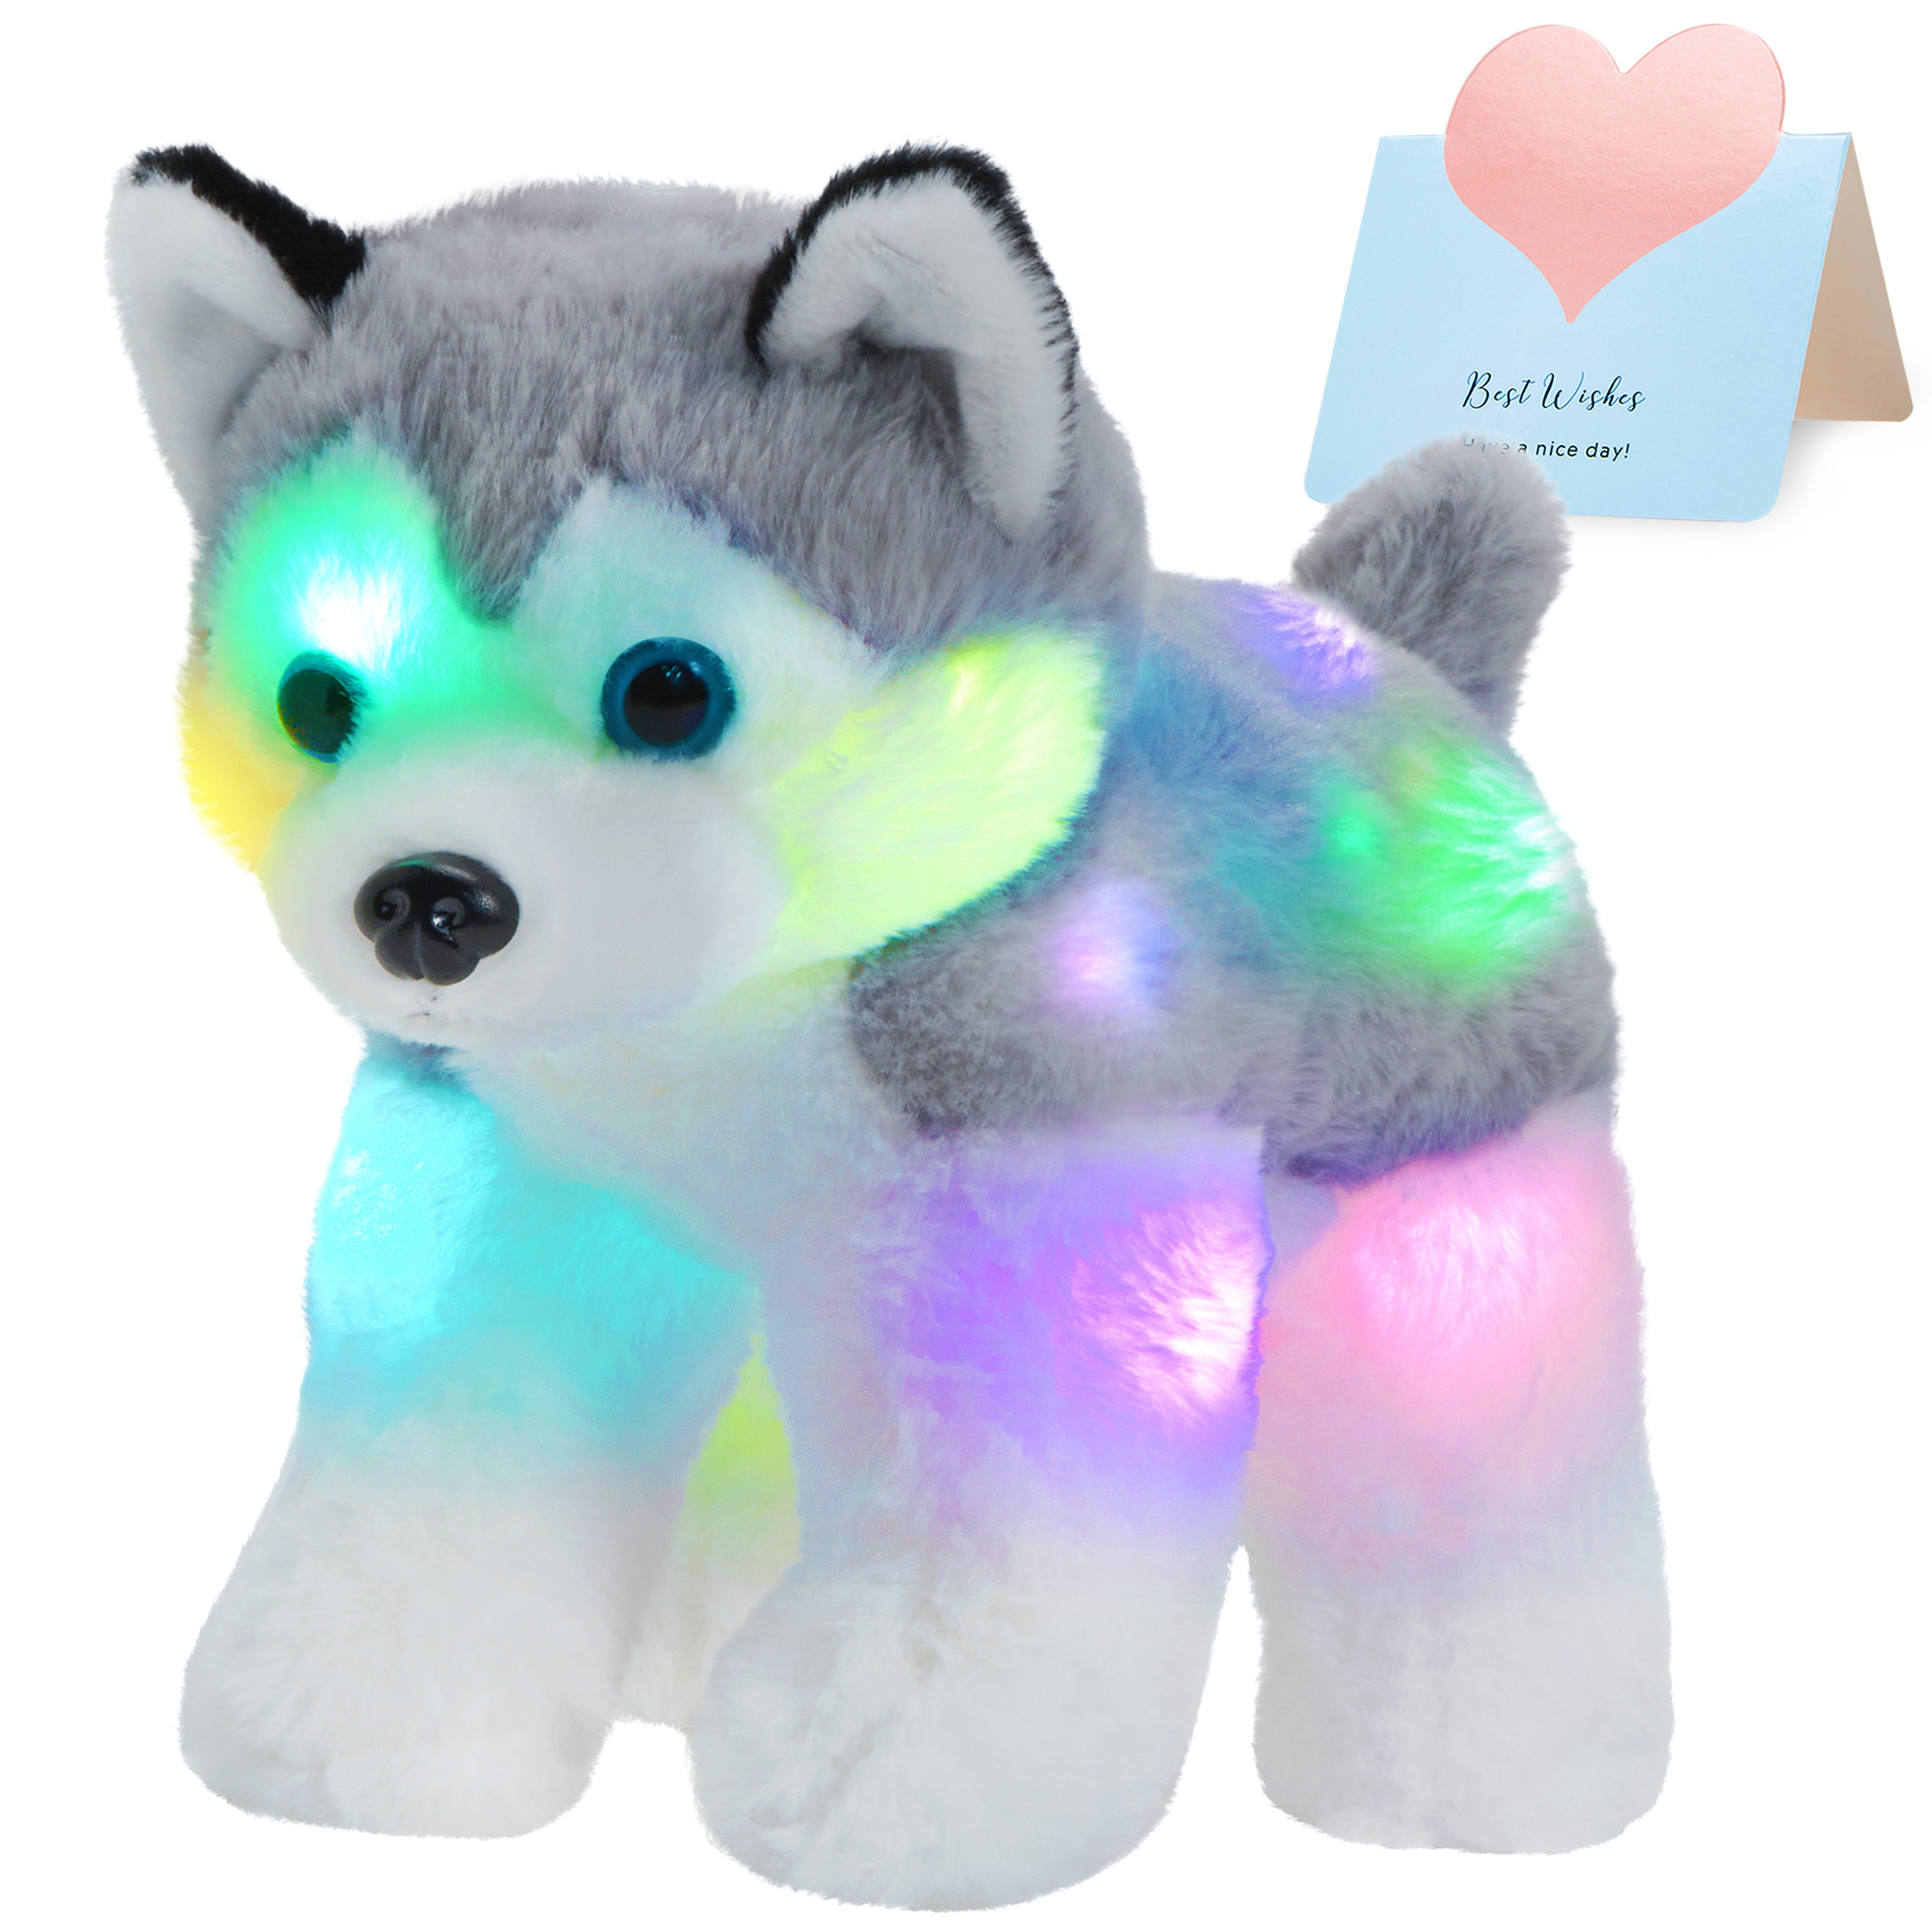 Glowing Husky Puppy Plush Toy, Soft And Cute Stuffed Animal, Interior  Decoration Ornament, Without Batteries, 7X15 Inches (17X38cm)